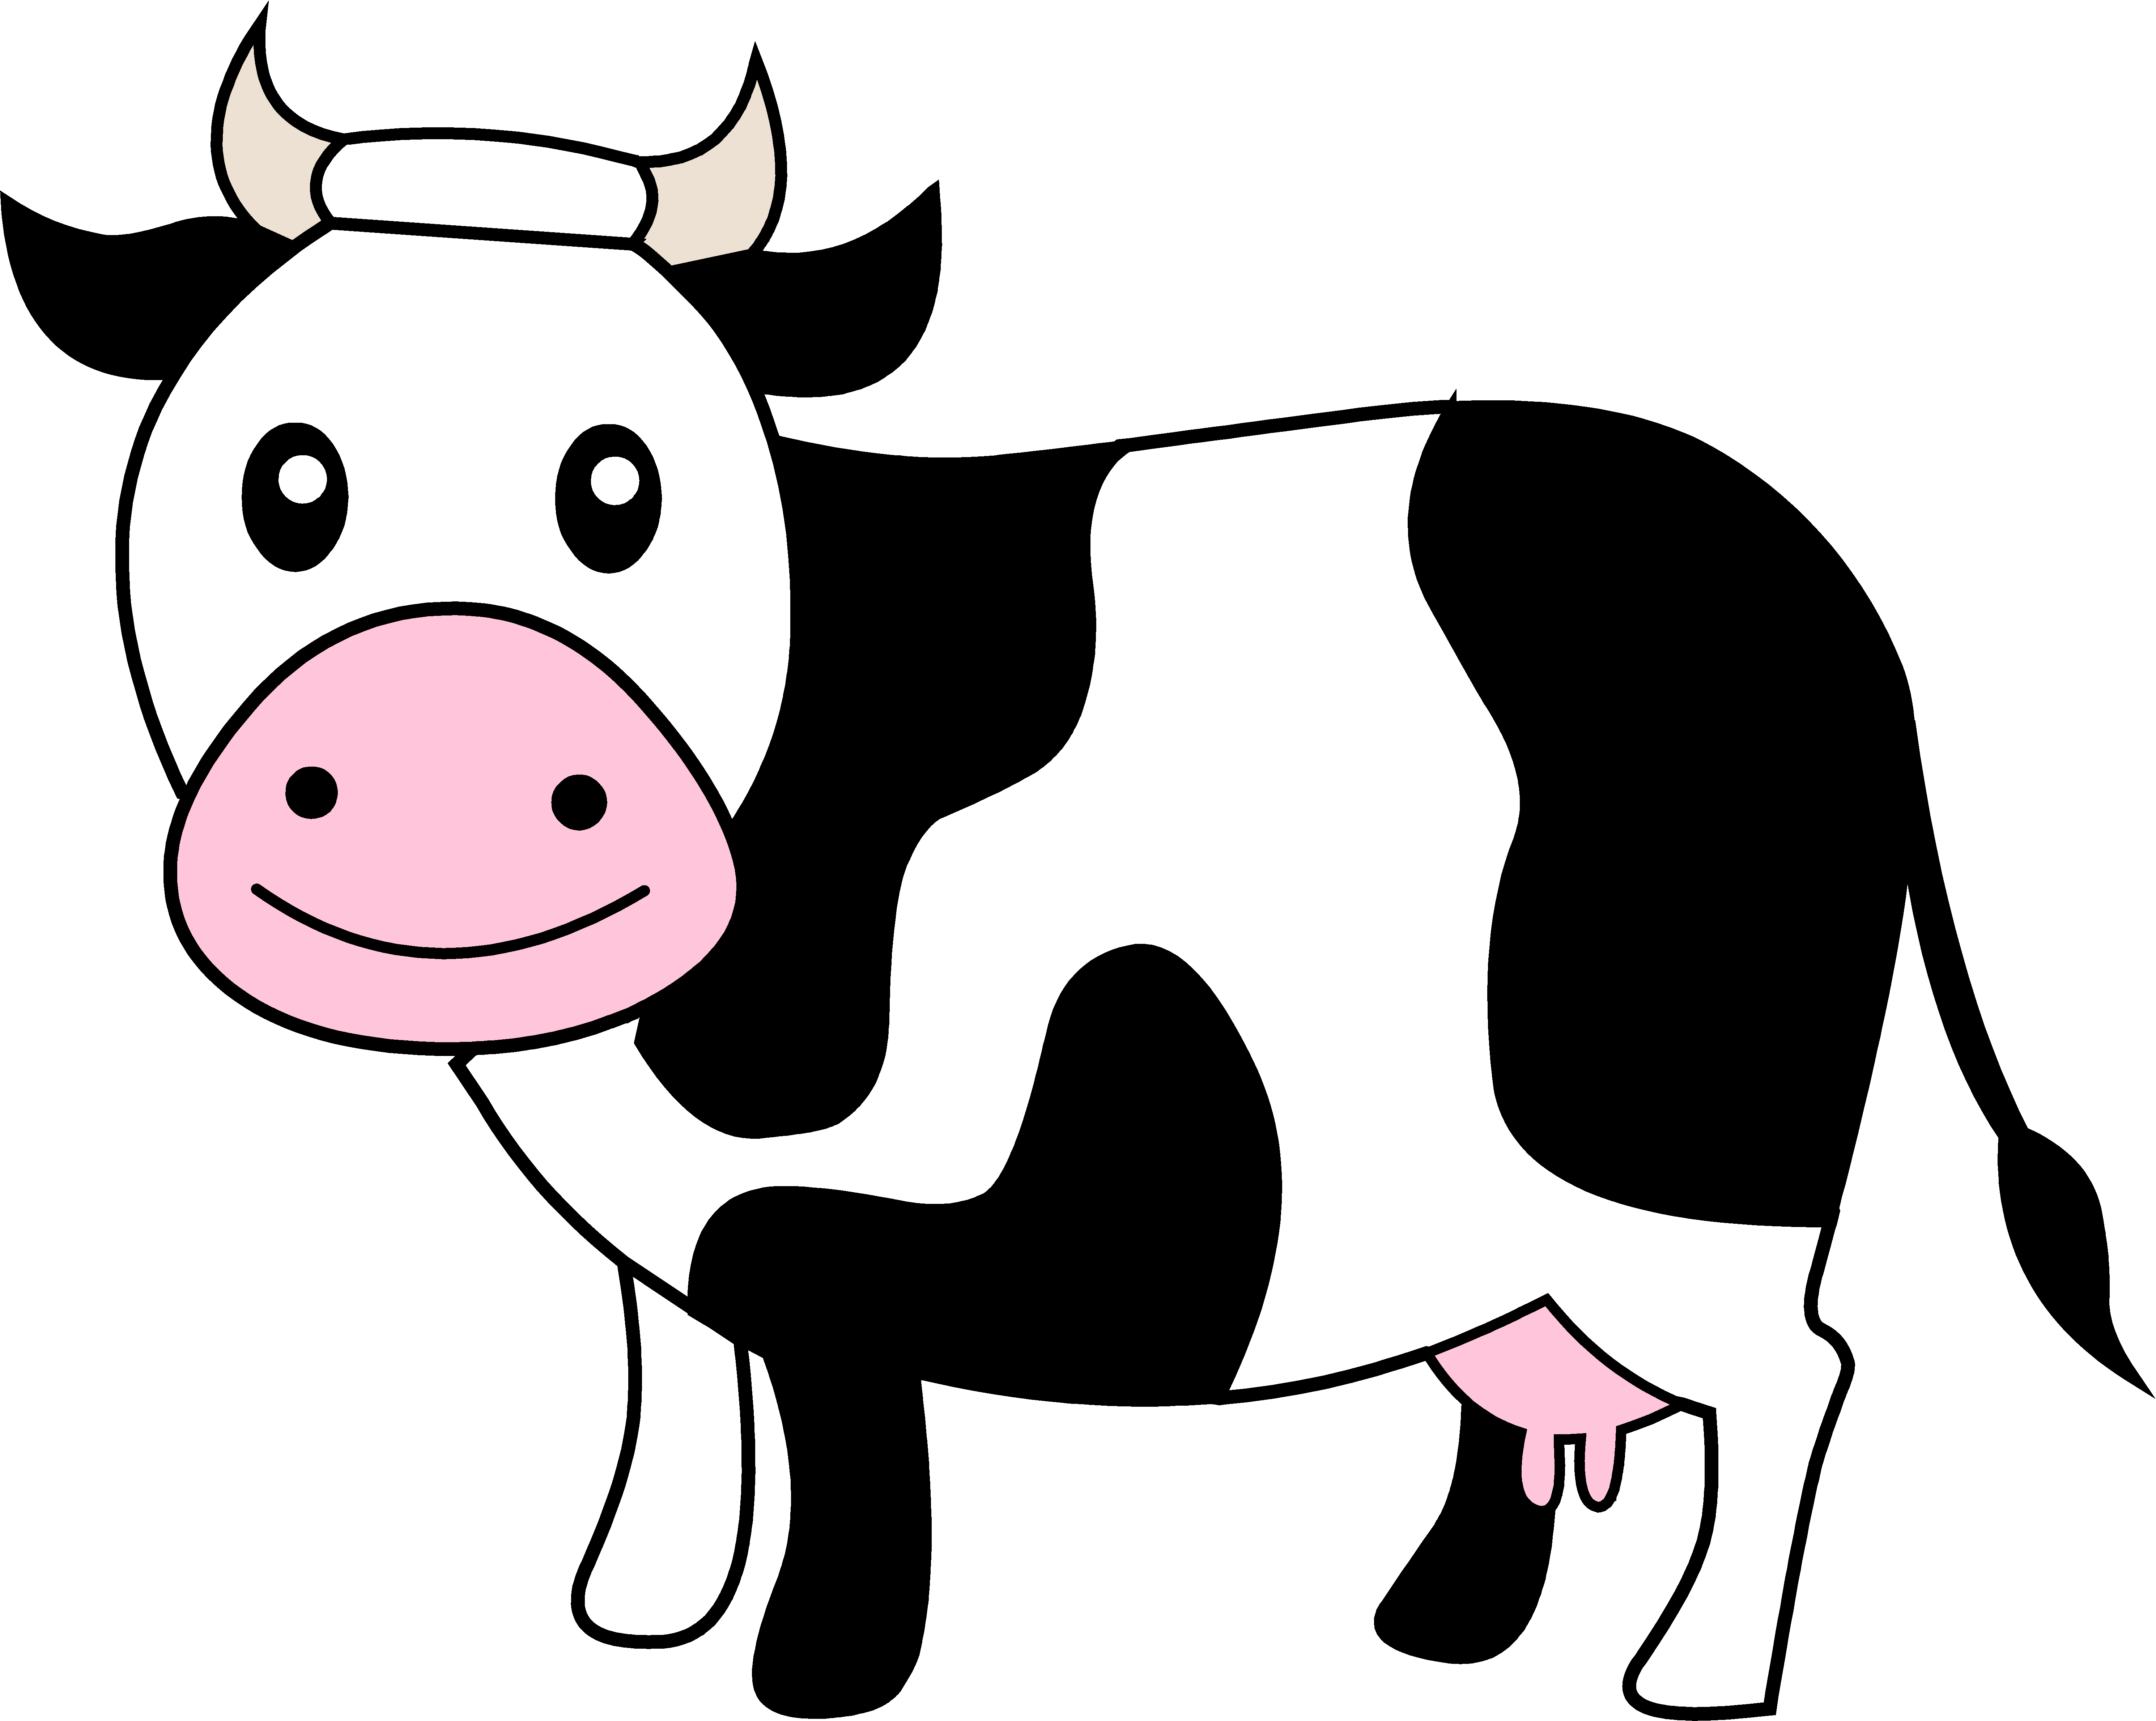 cow clipart simple - photo #23